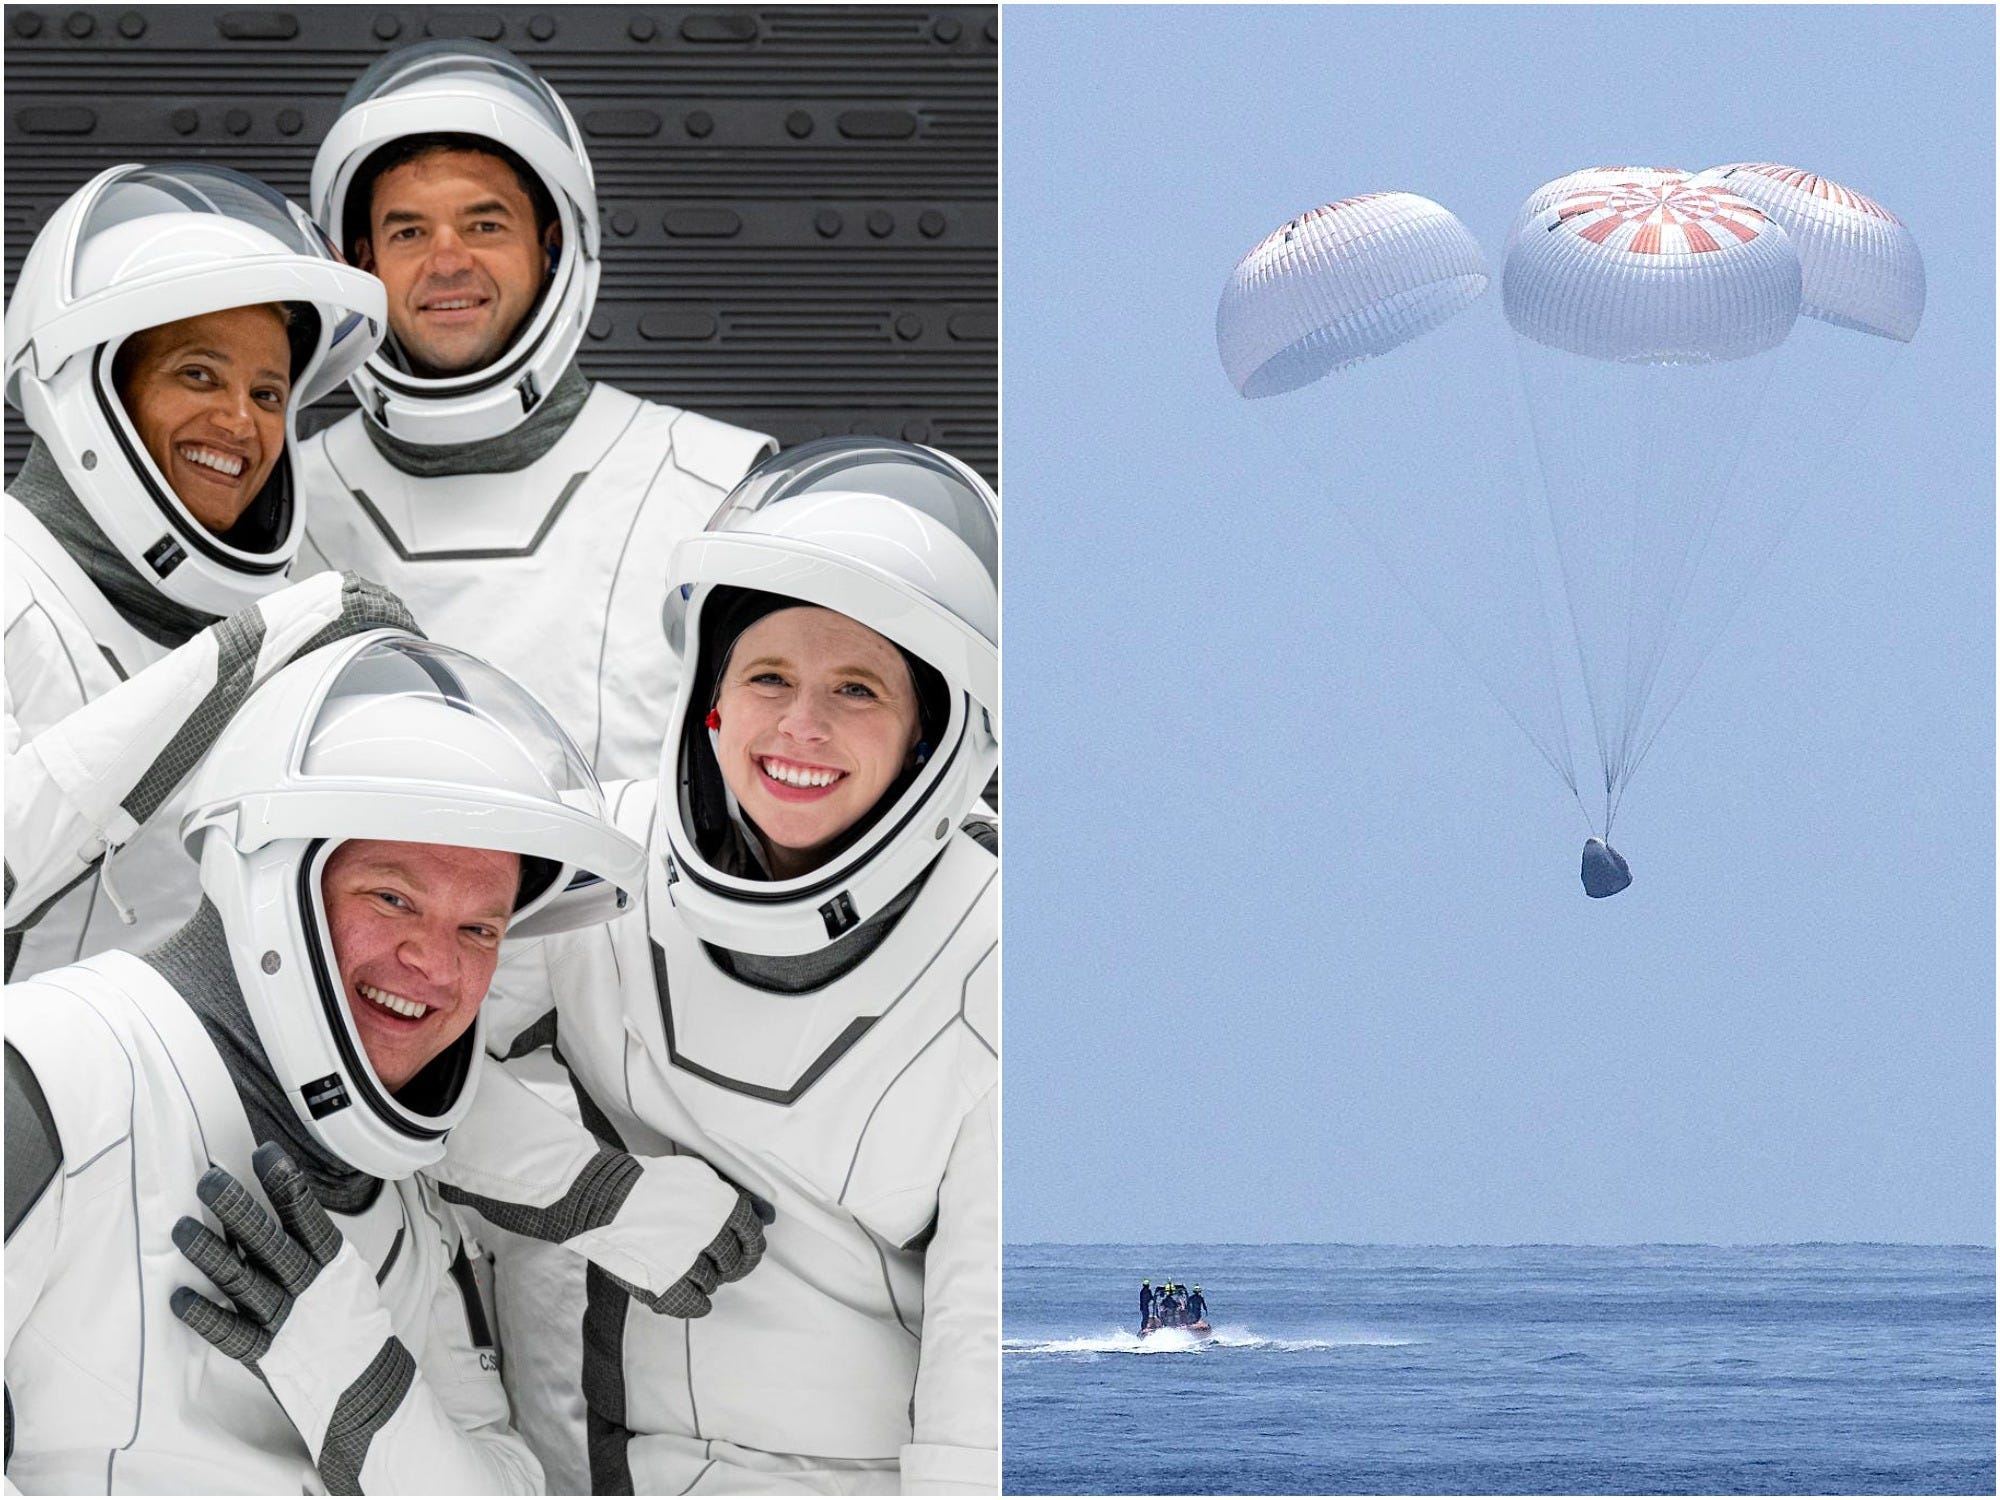 inspiration4 crew members in spacesuits side by side with image of parachutes lowering crew dragon spaceship into ocean splashdown